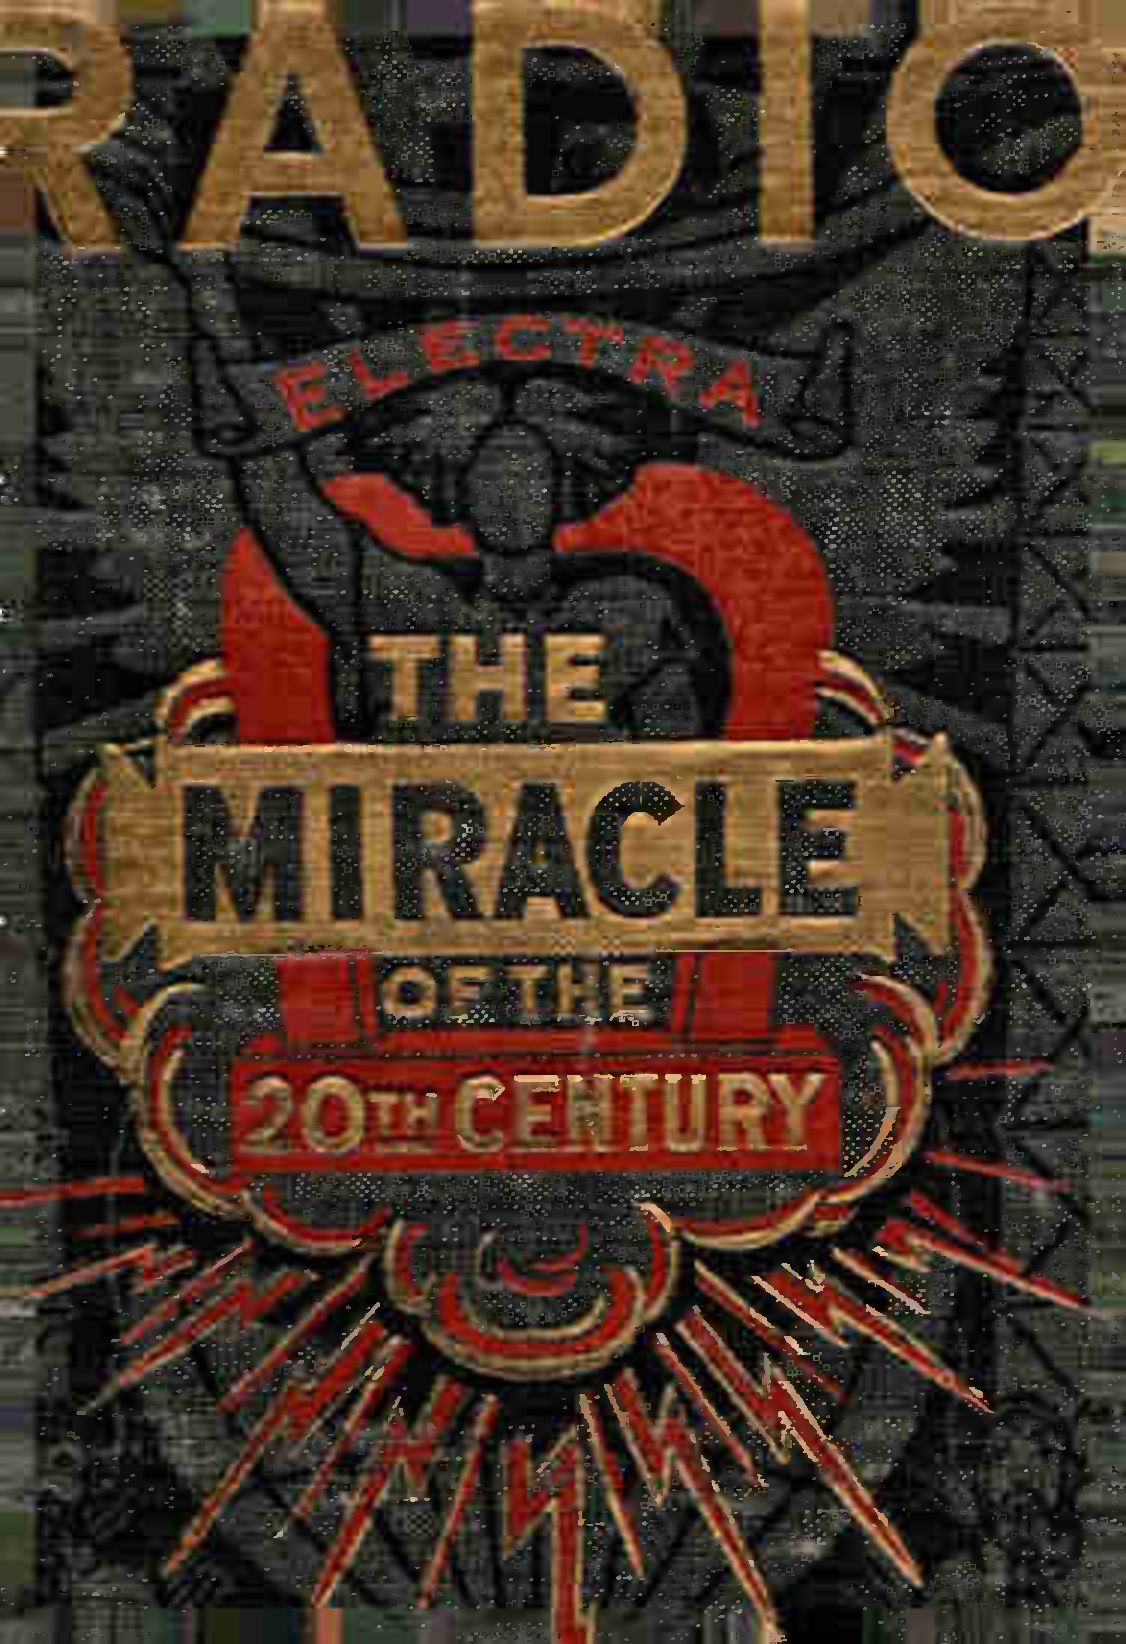 Radio Miracle of the 20th century 1922